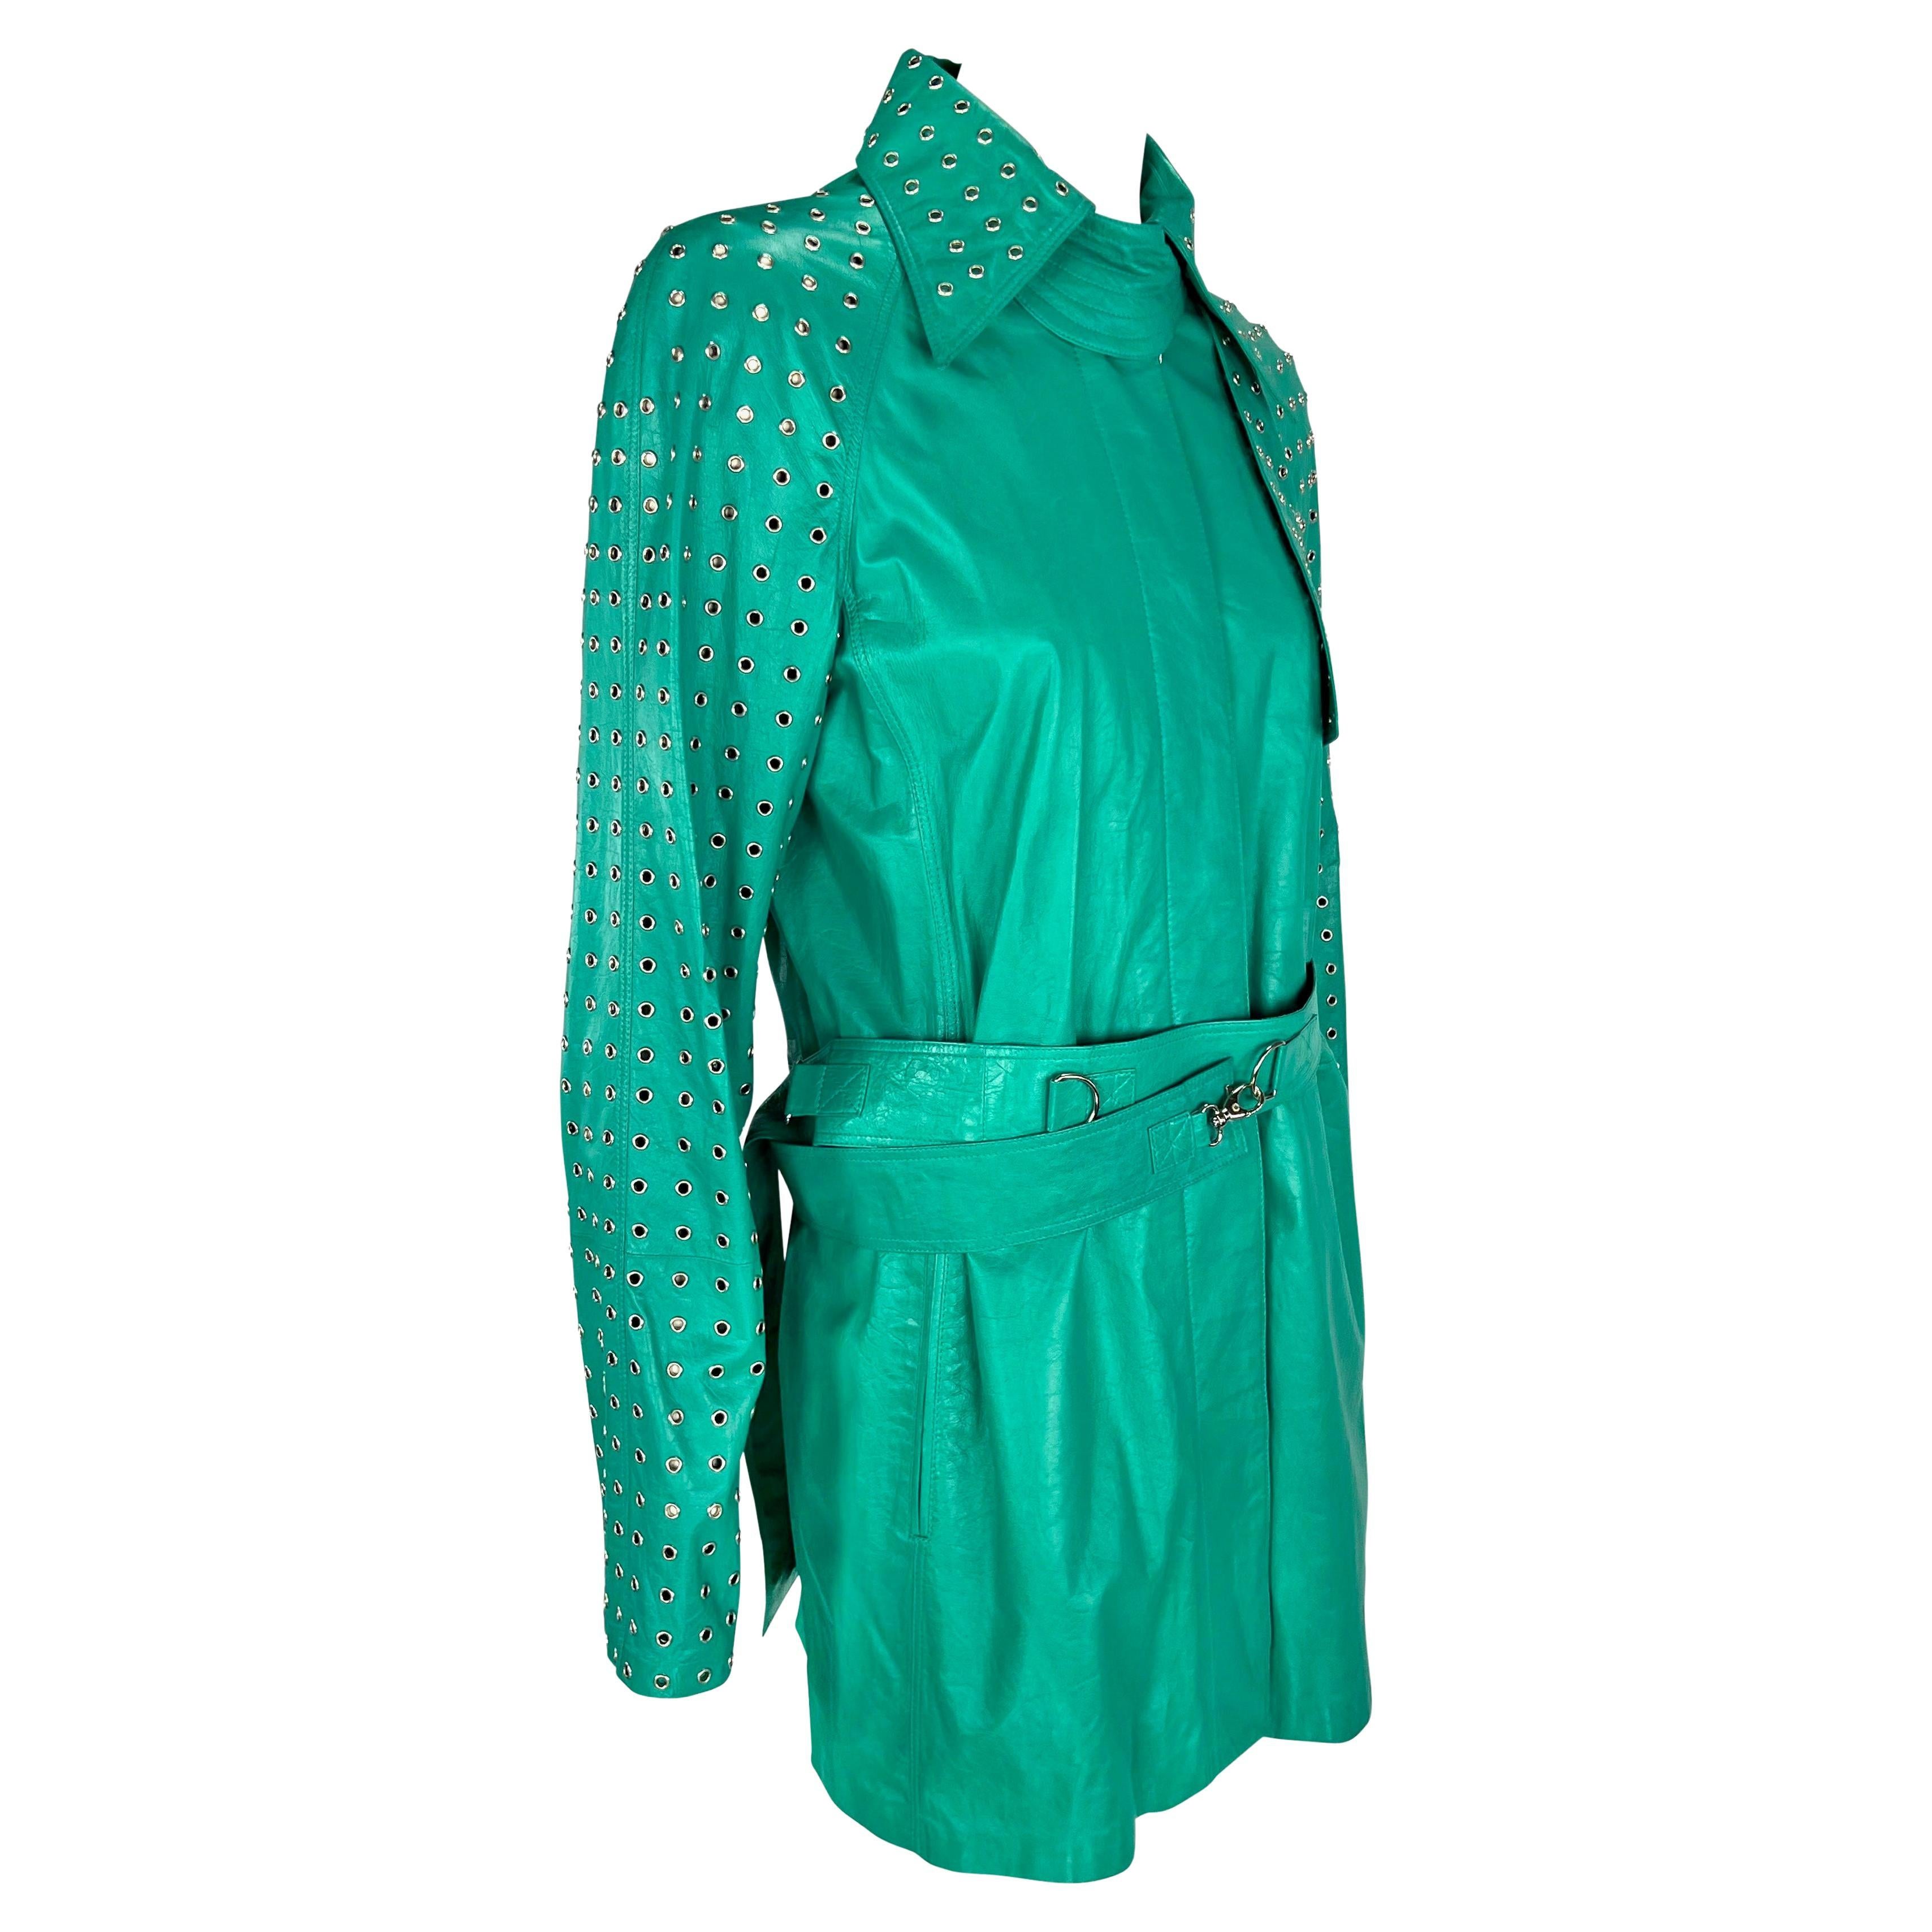 NWT S/S 2003 Gianni Versace by Donatella Versace Teal Rivet Leather Jacket For Sale 4